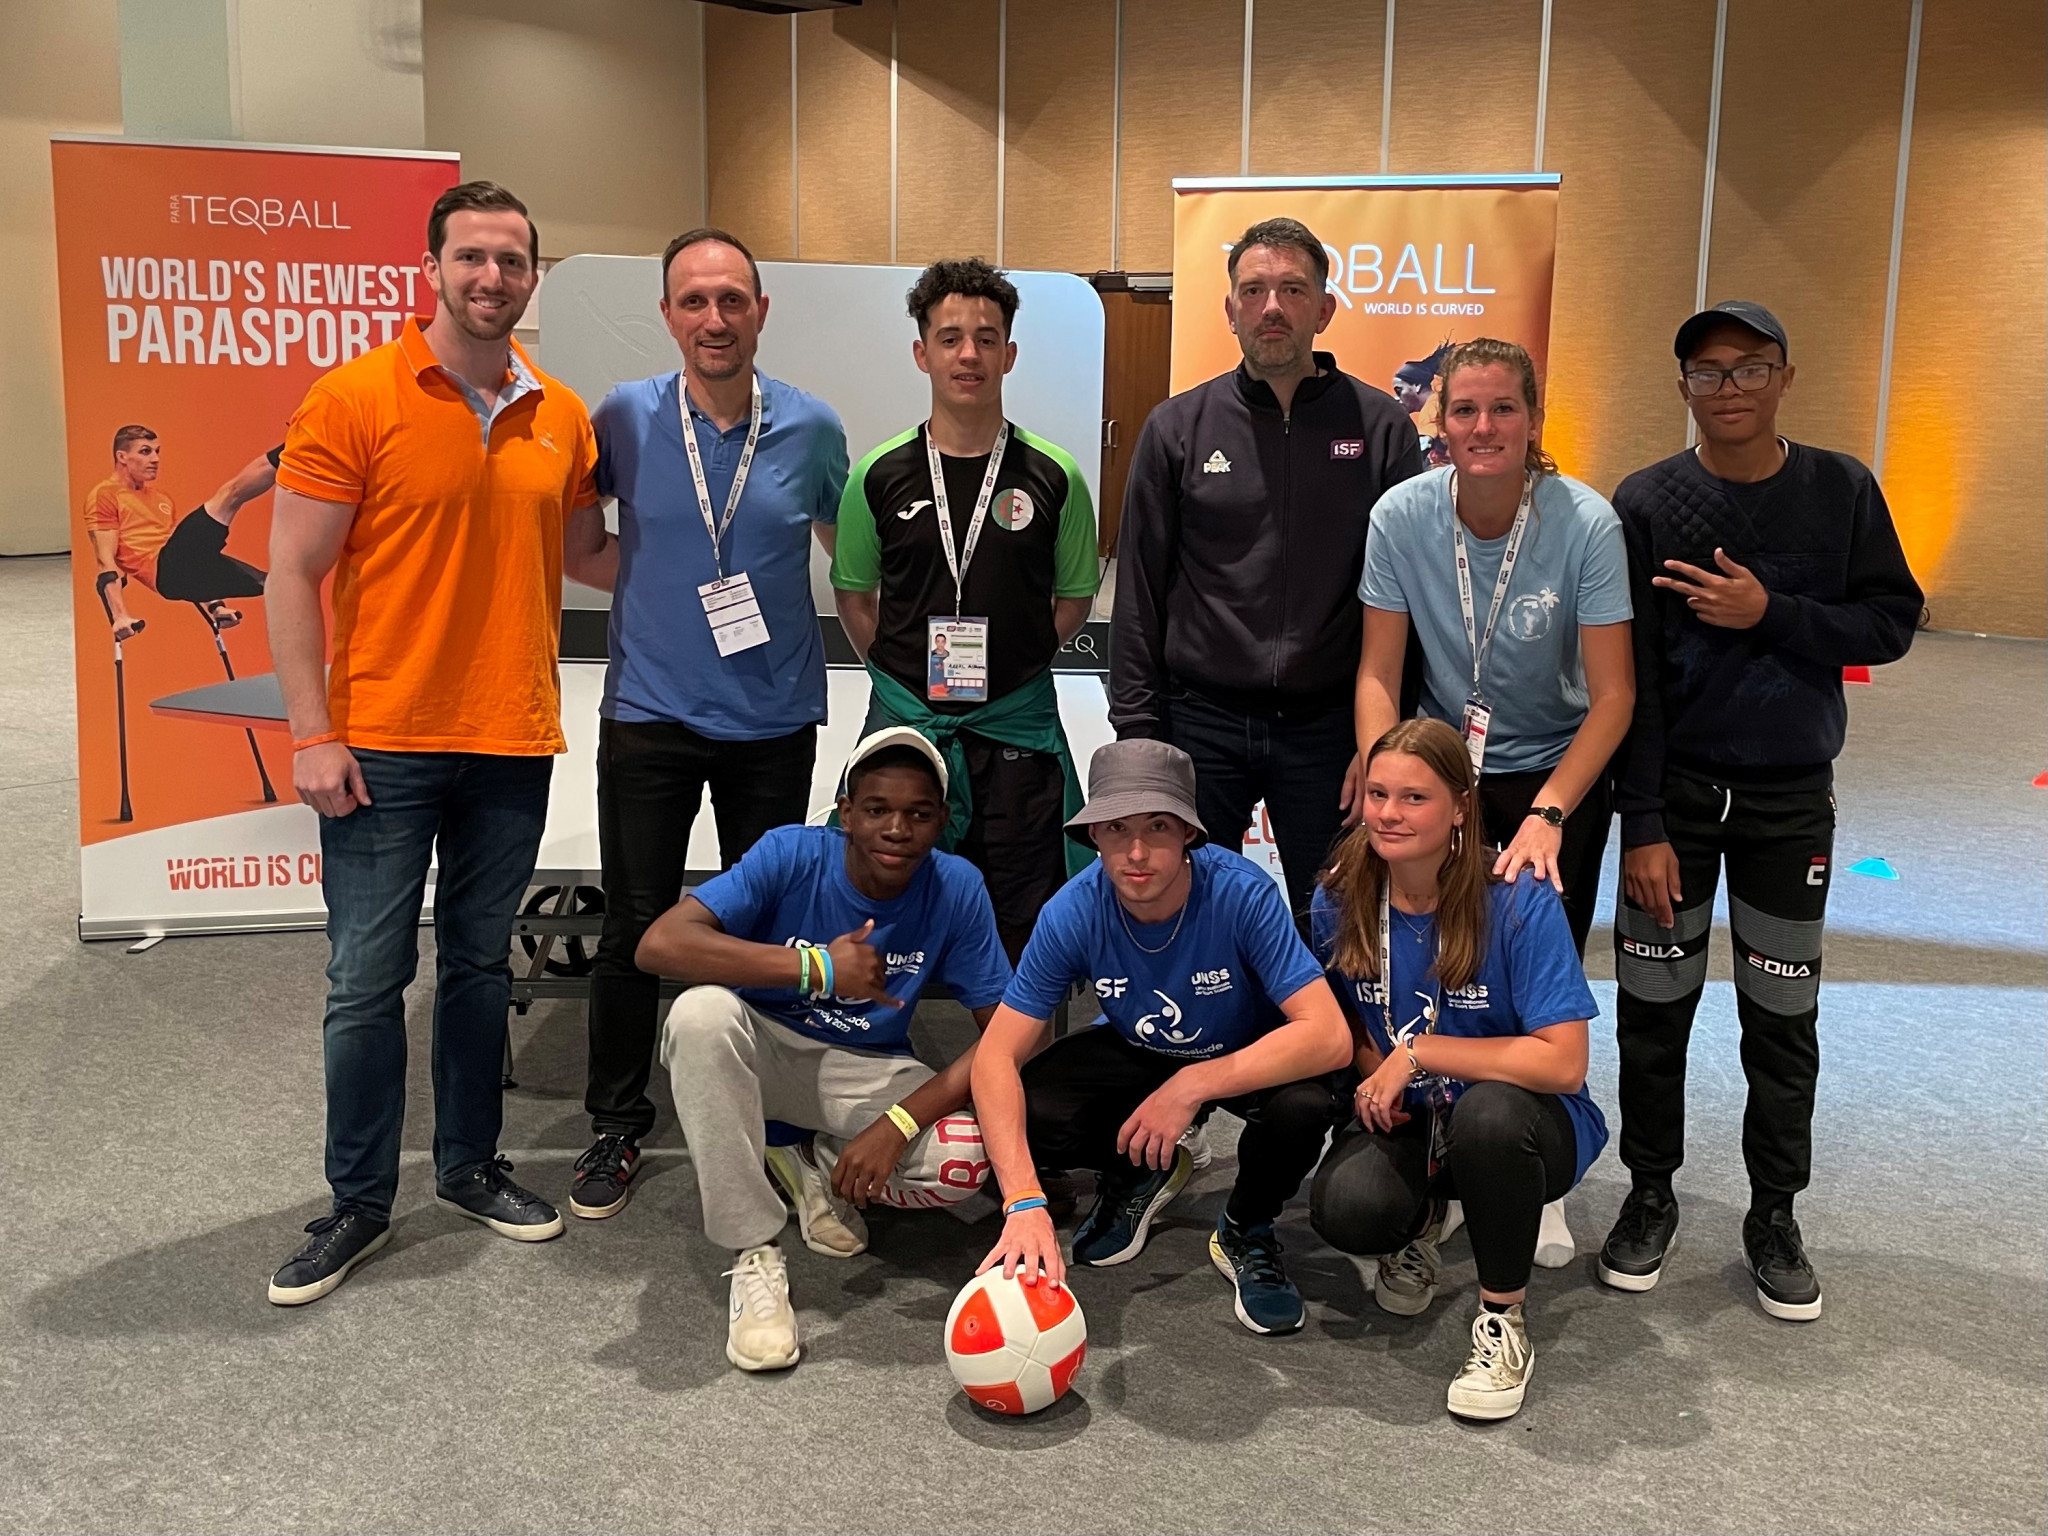 FITEQ holds teqball demonstration event at ISF Gymnasiade in Normandy